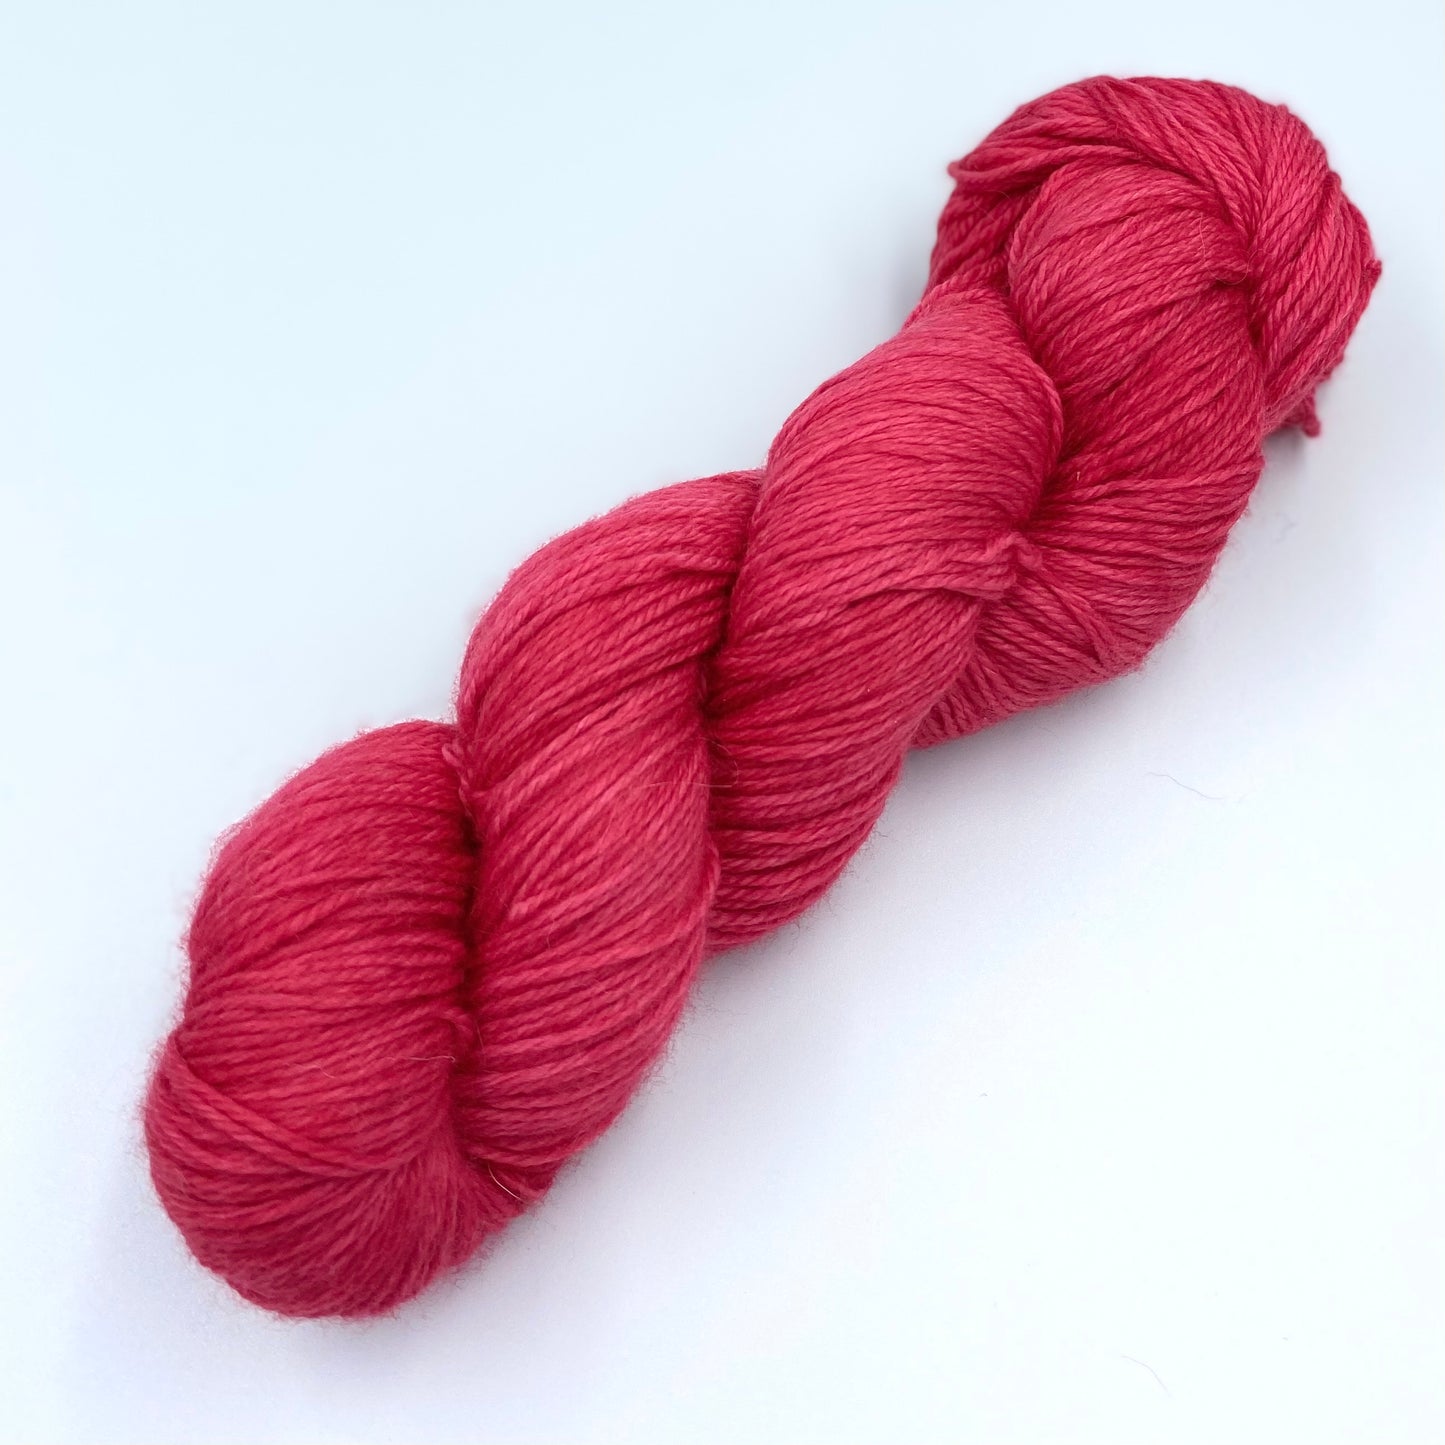 A skein of sparkly wool and nylon yarn hand dyed in the color red